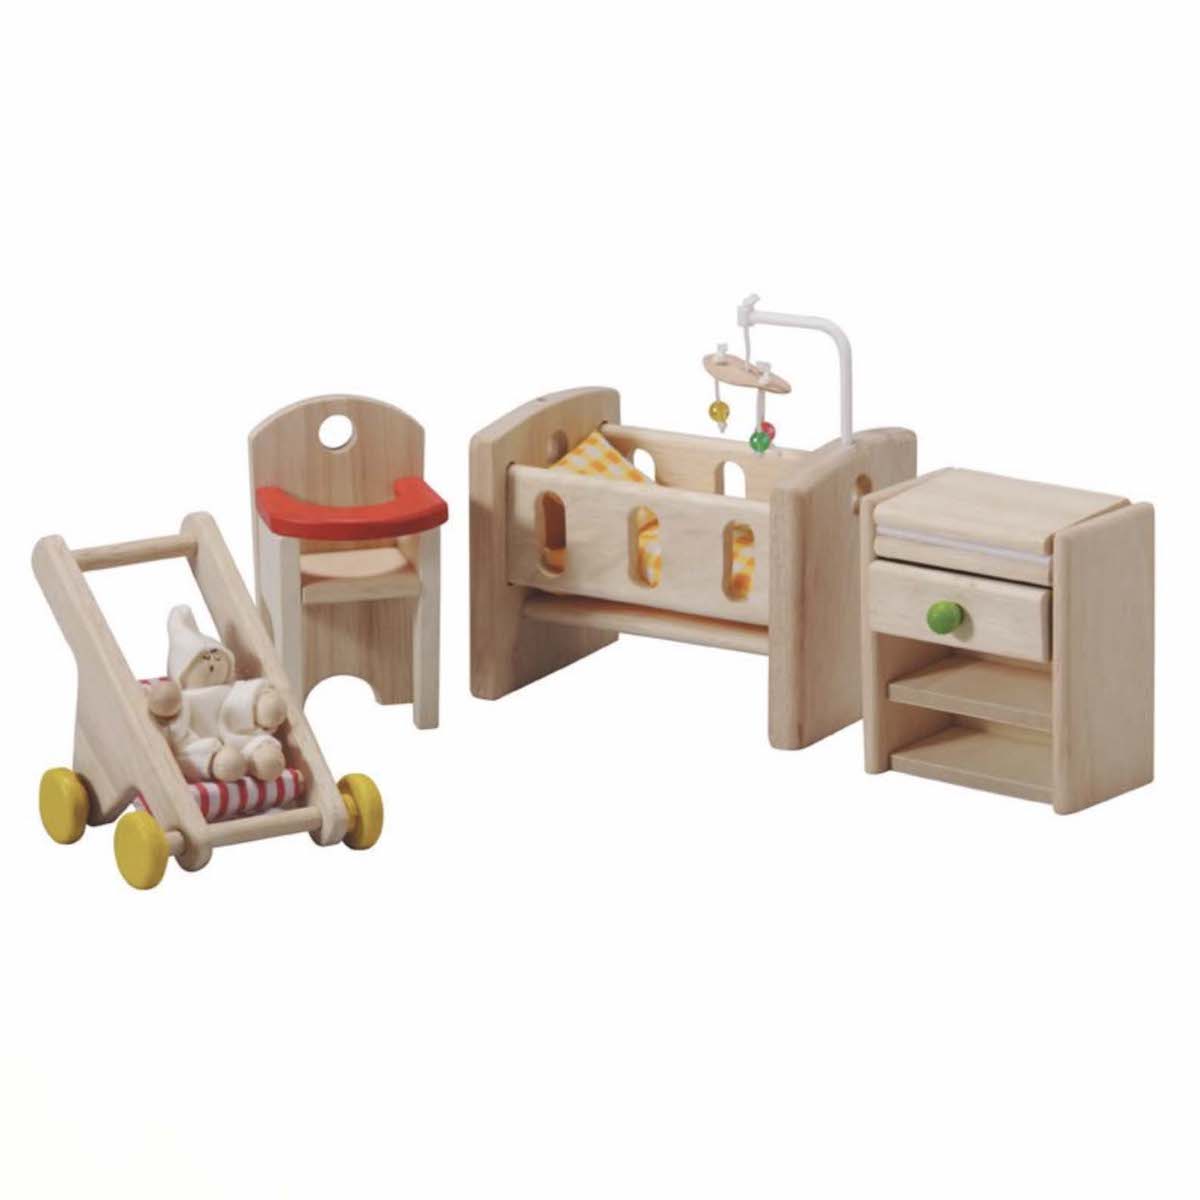 Plan Toys Nursery House Furniture - Orchard Collection 7329